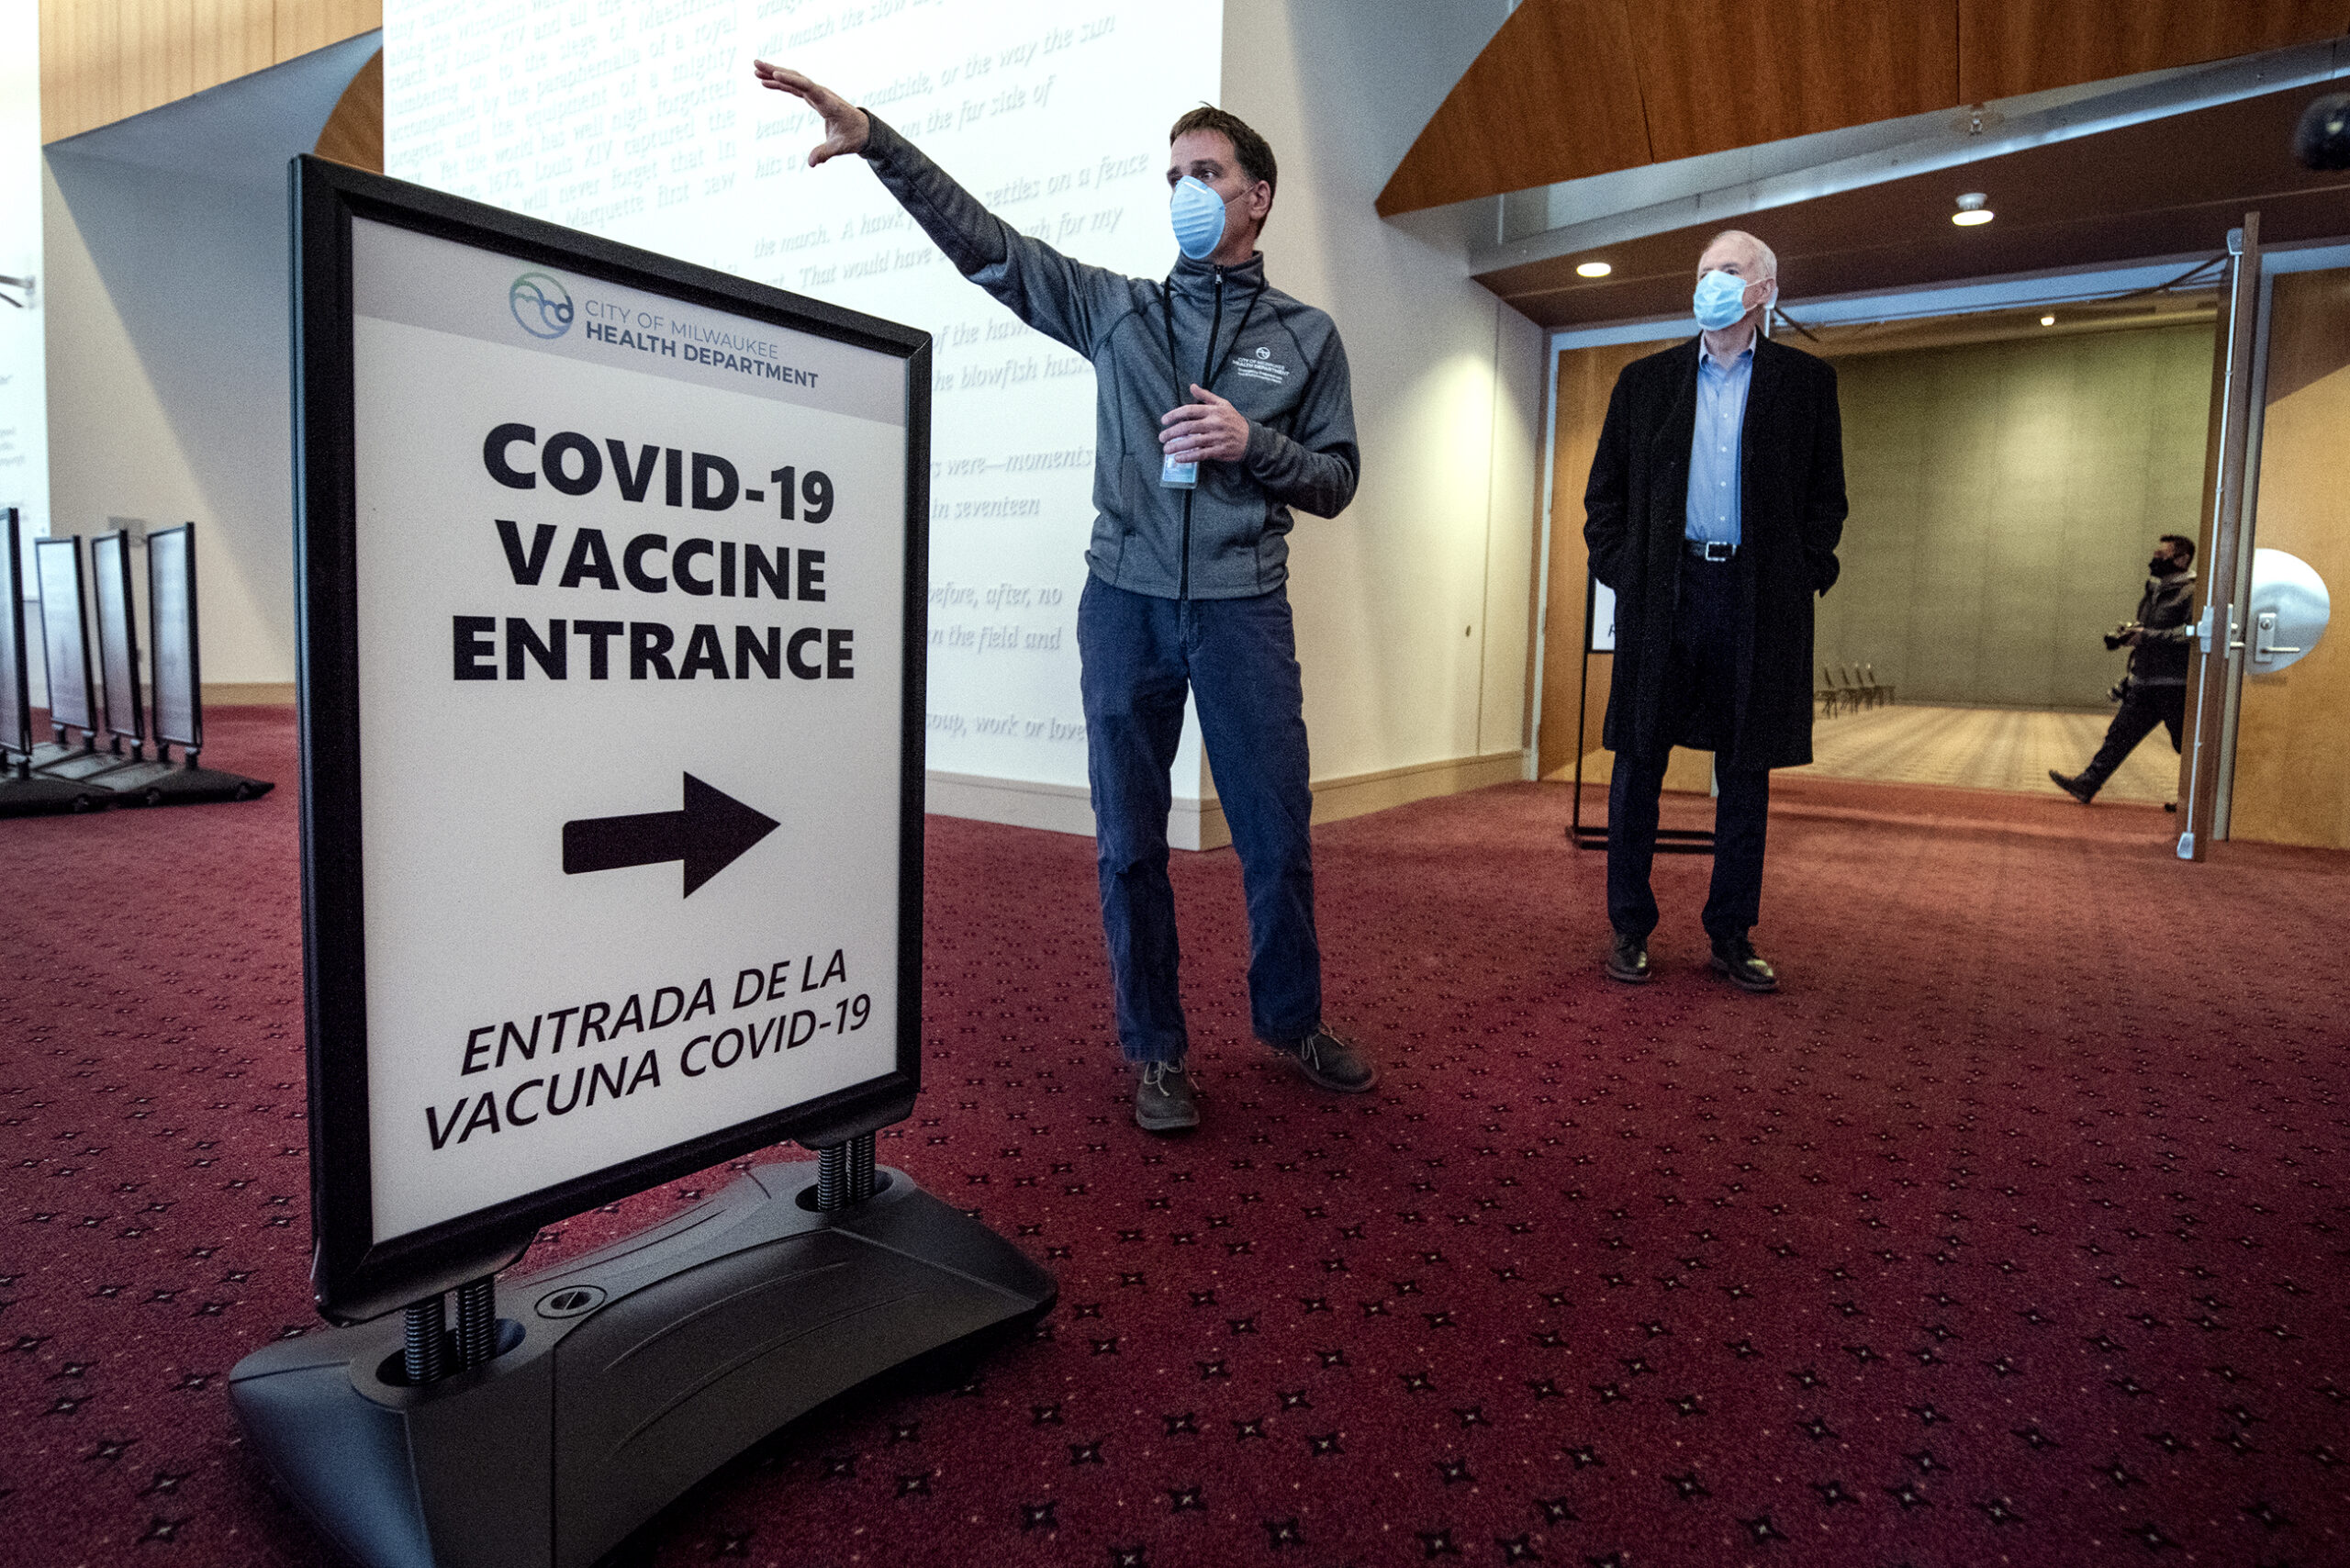 Two men in face masks stand by a sign that says "COVID-19 Vaccine Entrance"